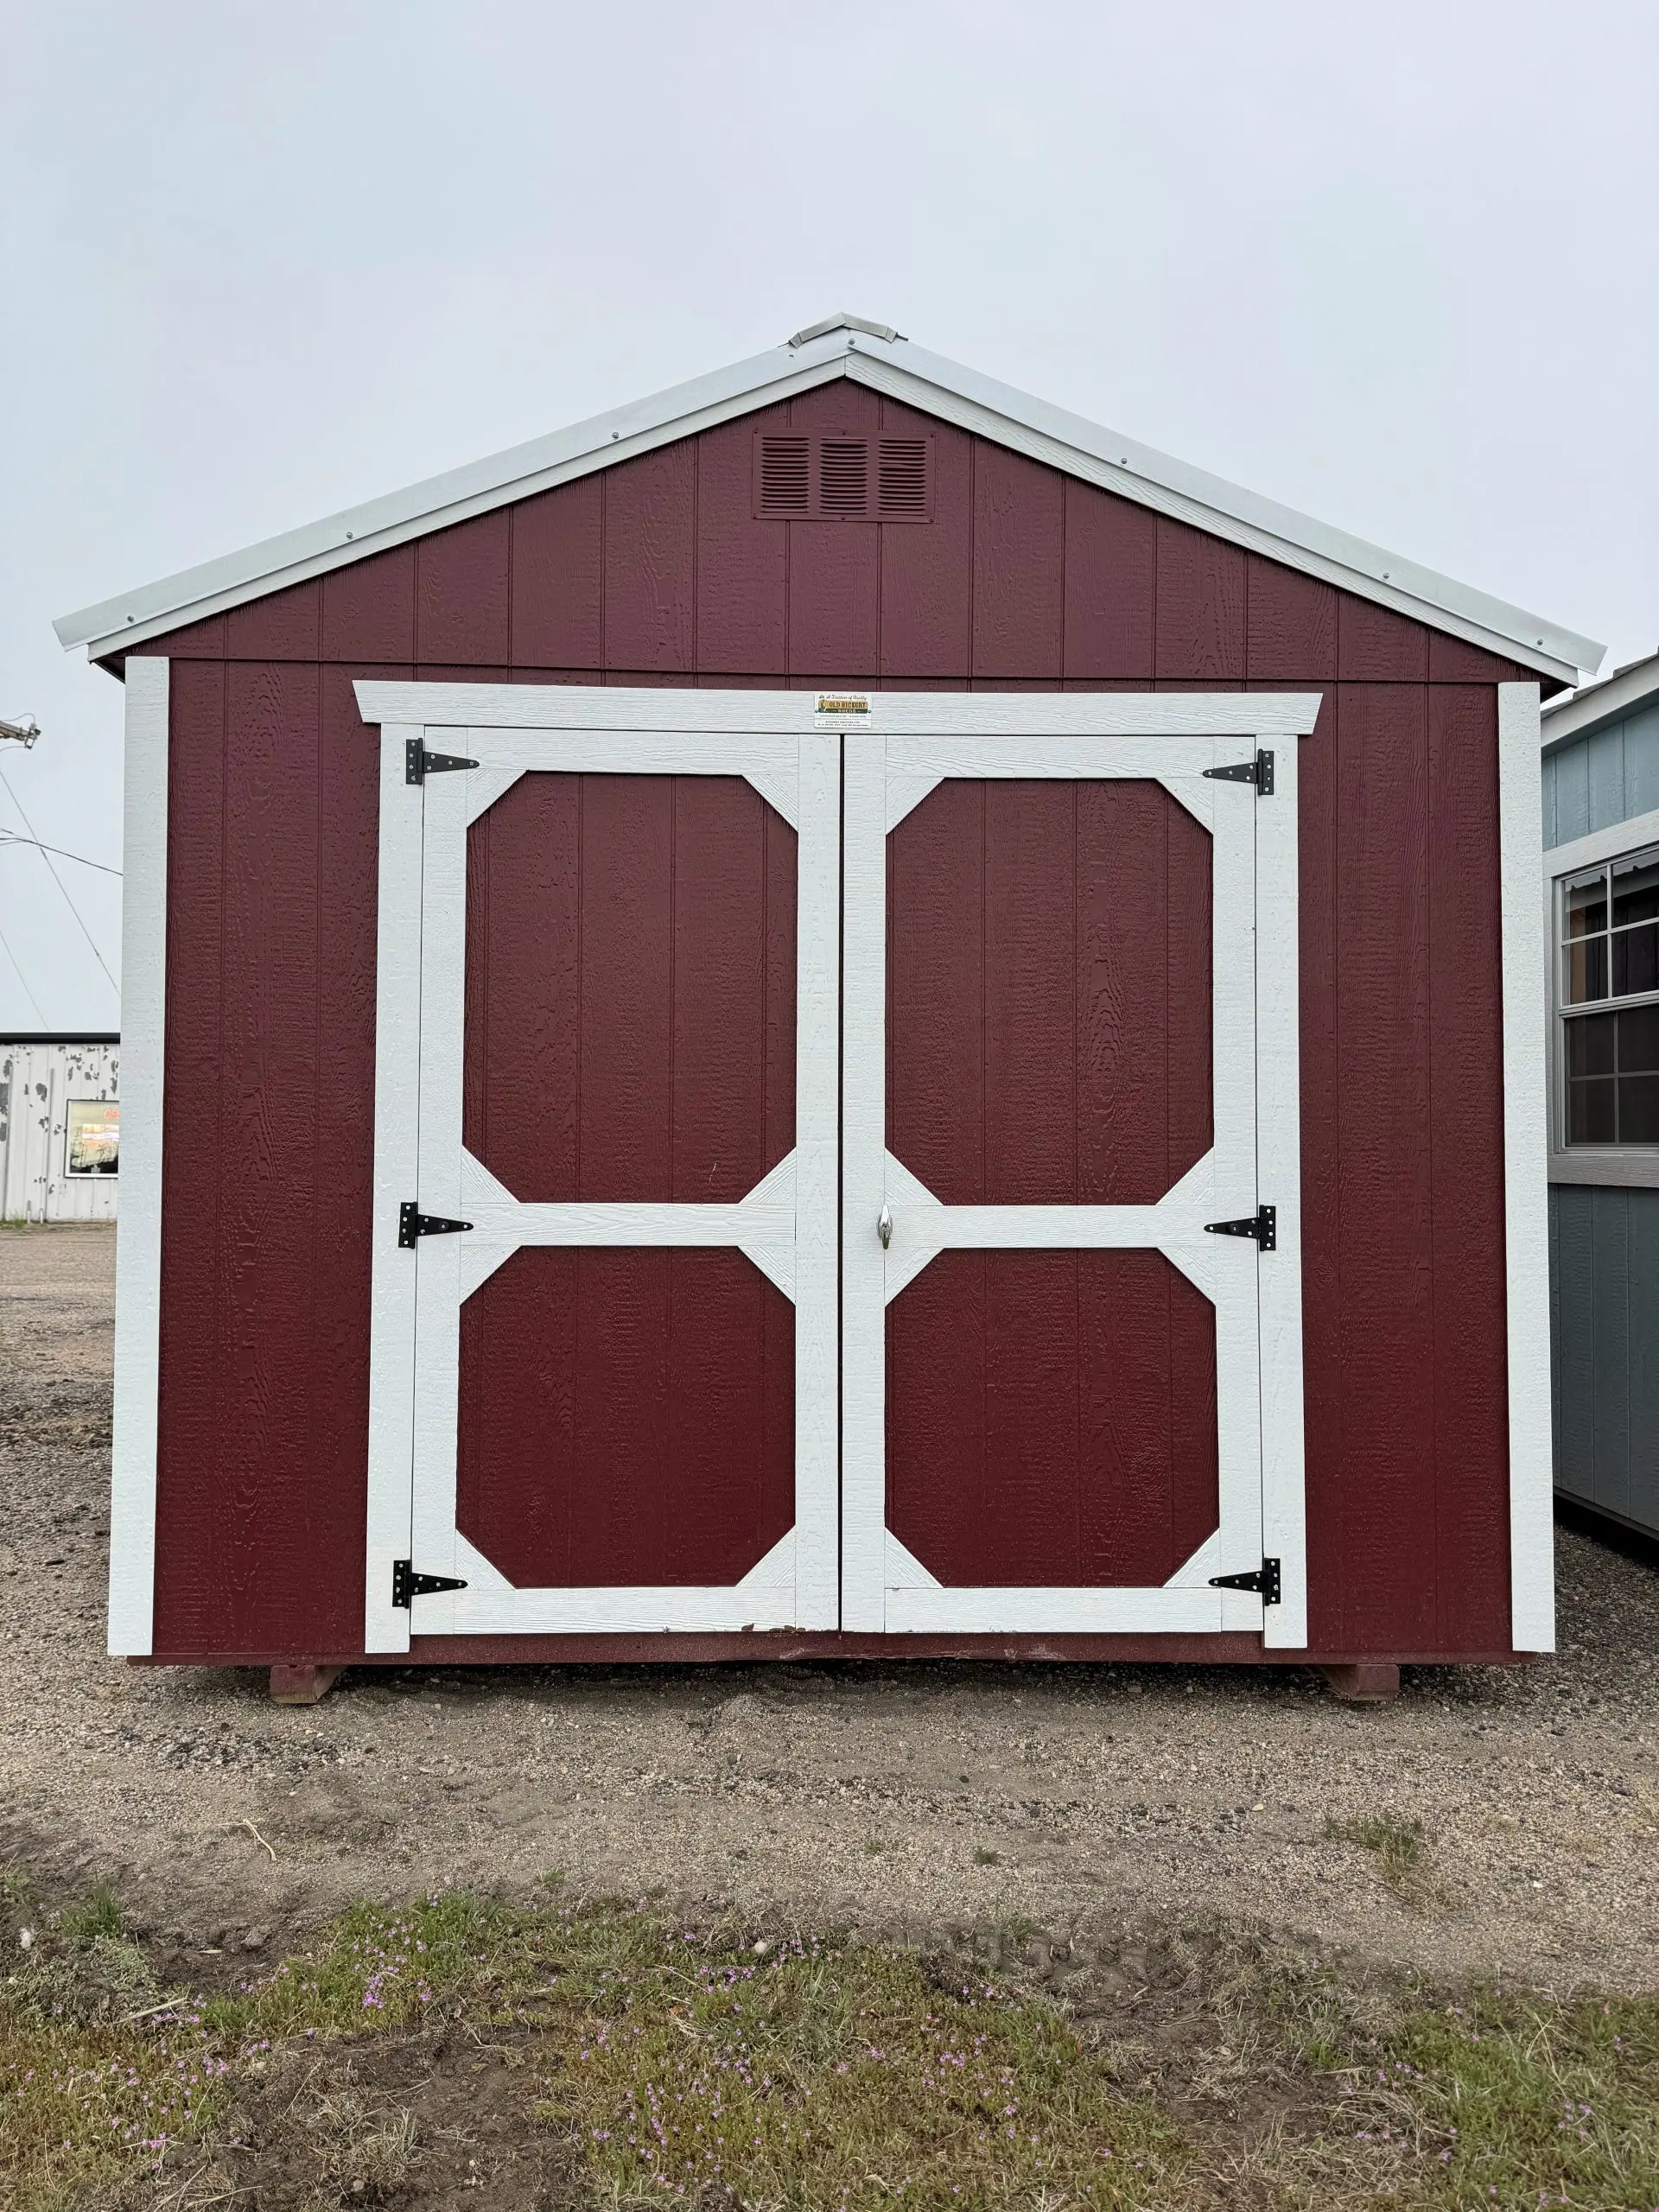 For Sale 10×12 Utility Shed Pinnacle Red Paint Barn White Trim at French Creek Design Shed Sales in Casper, WY